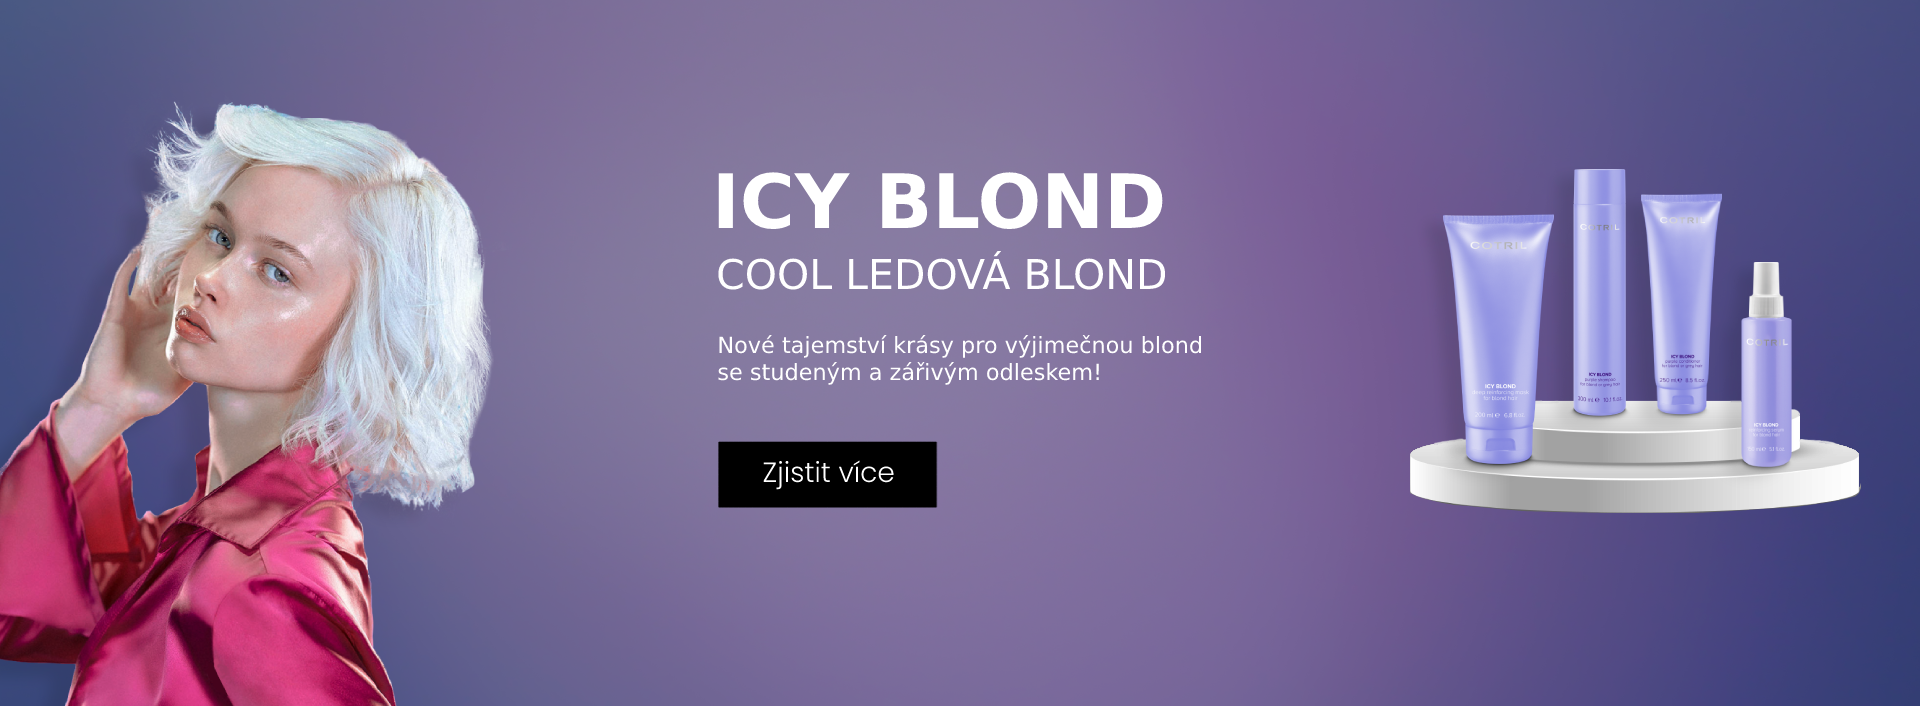 Cotril Icy blond